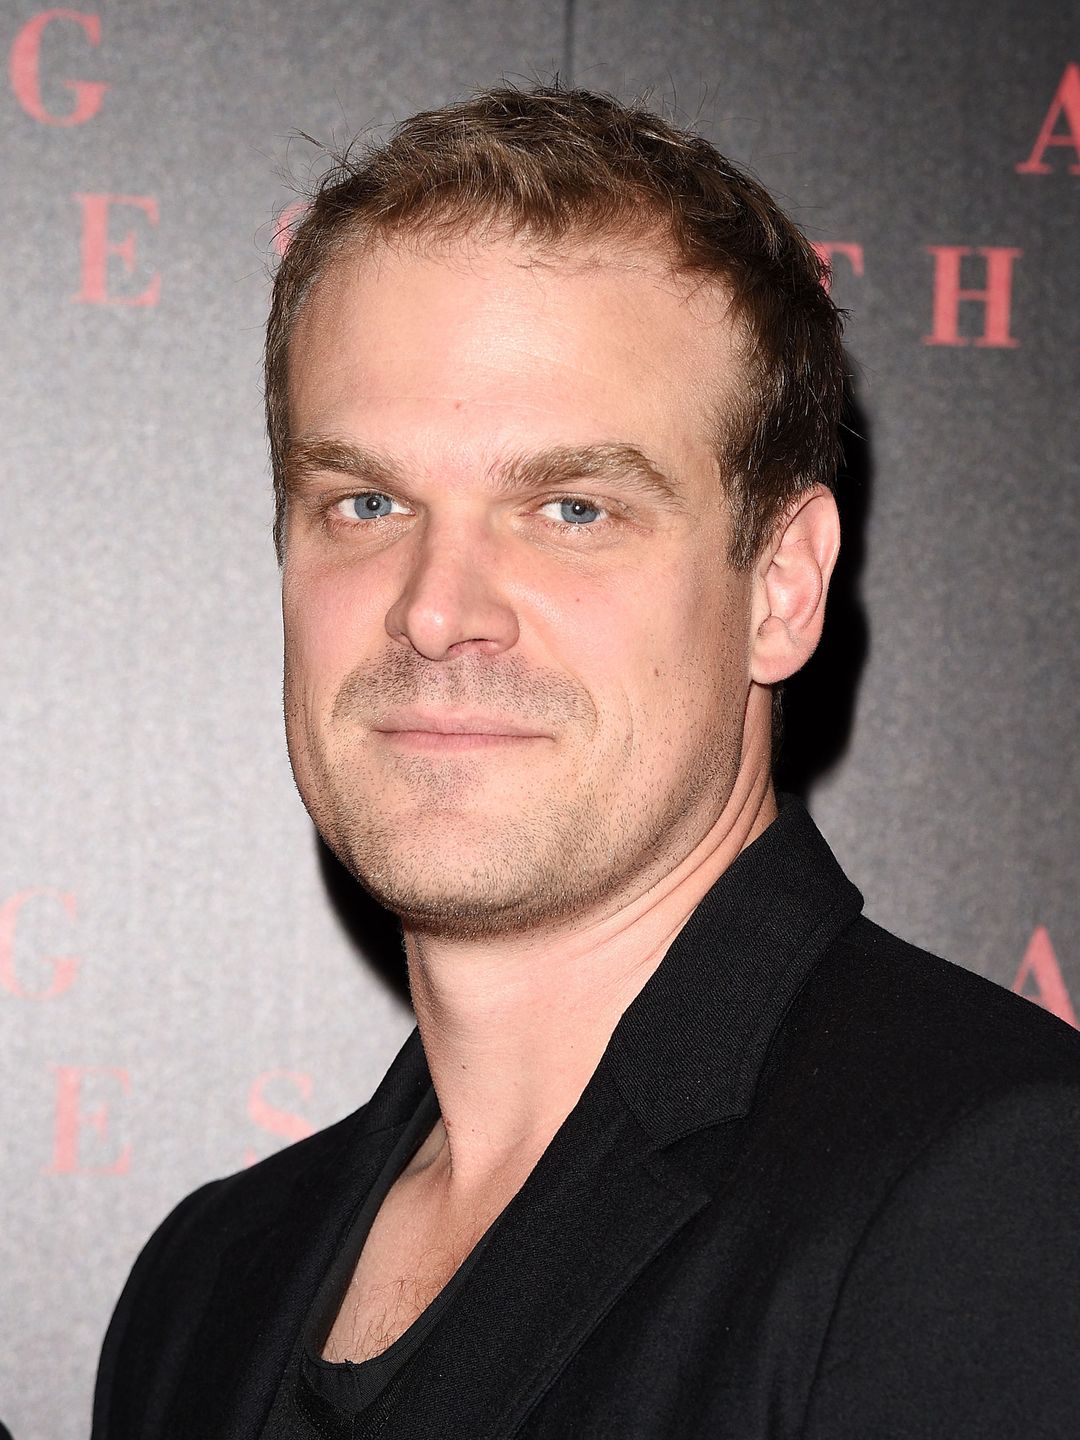 David Harbour does he have a wife